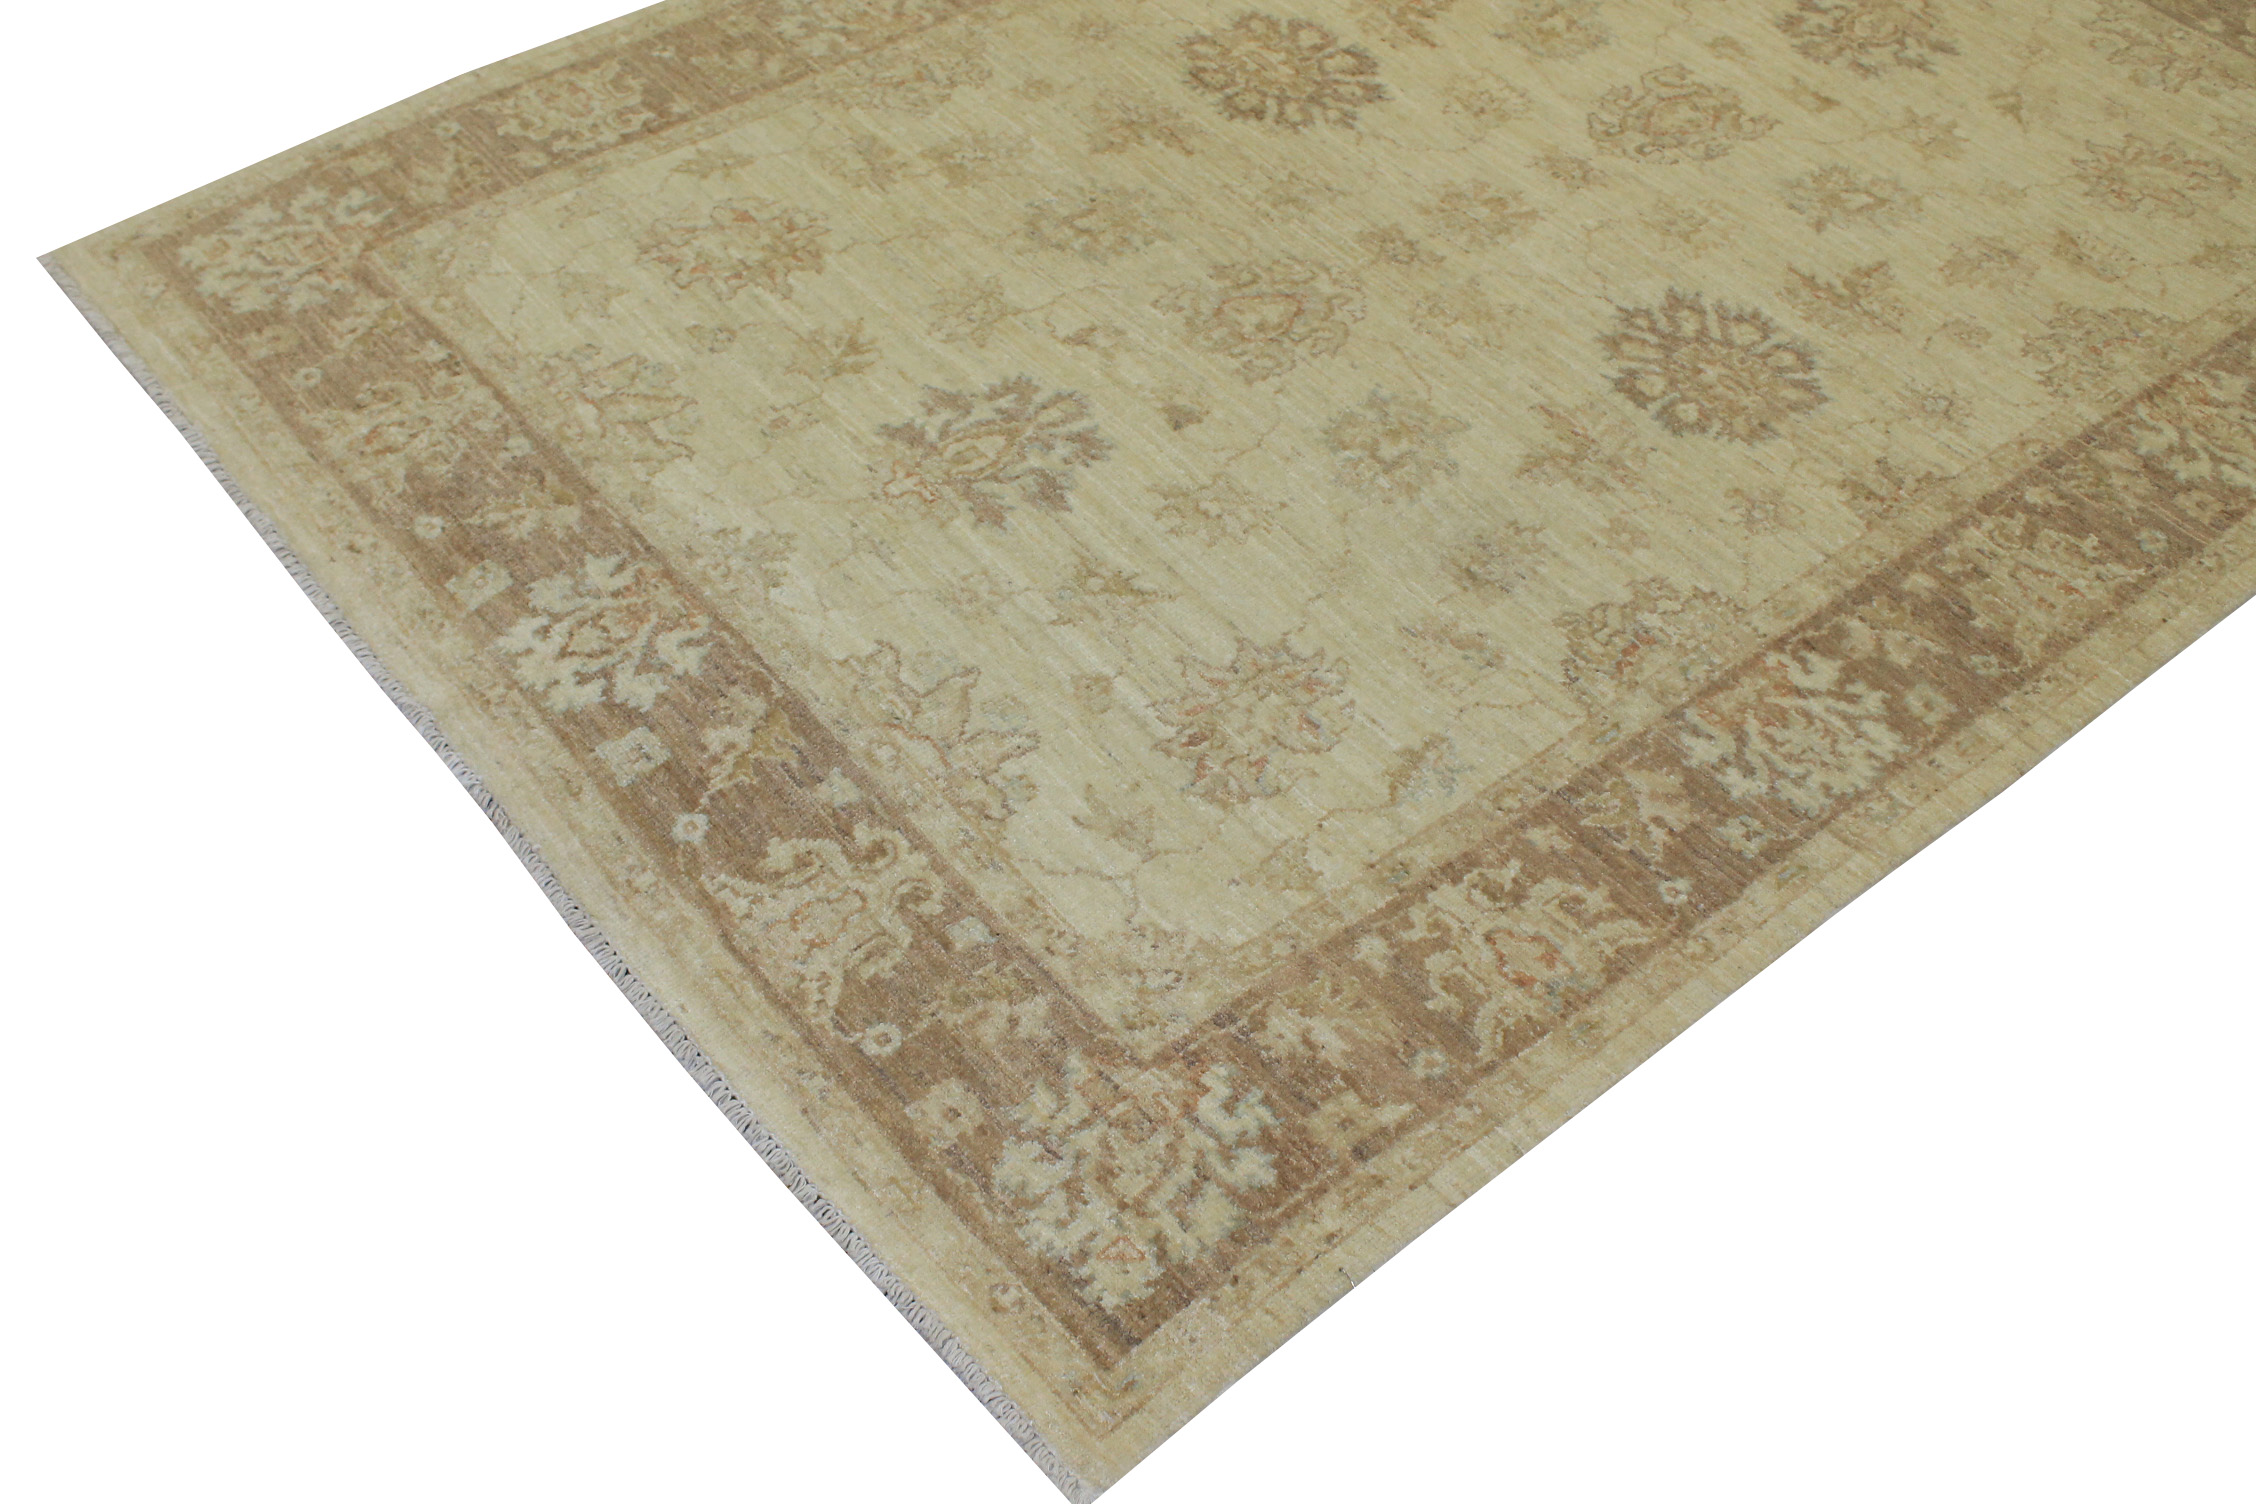 5x7/8 Peshawar Hand Knotted Wool Area Rug - MR013442